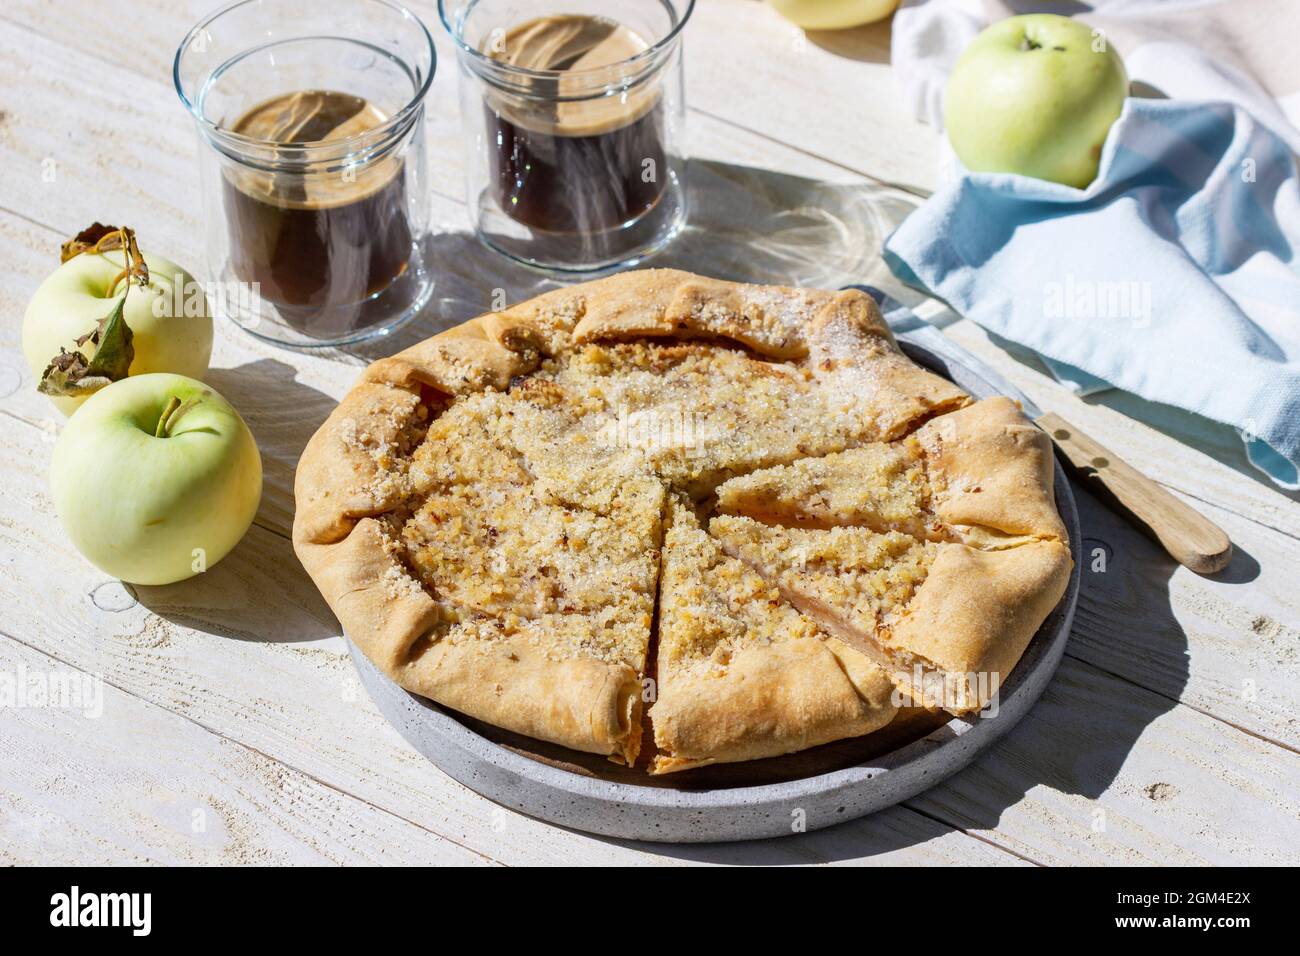 Apple galette with hazelnut streusel, served with coffee on a wooden background. Rustic style. Stock Photo